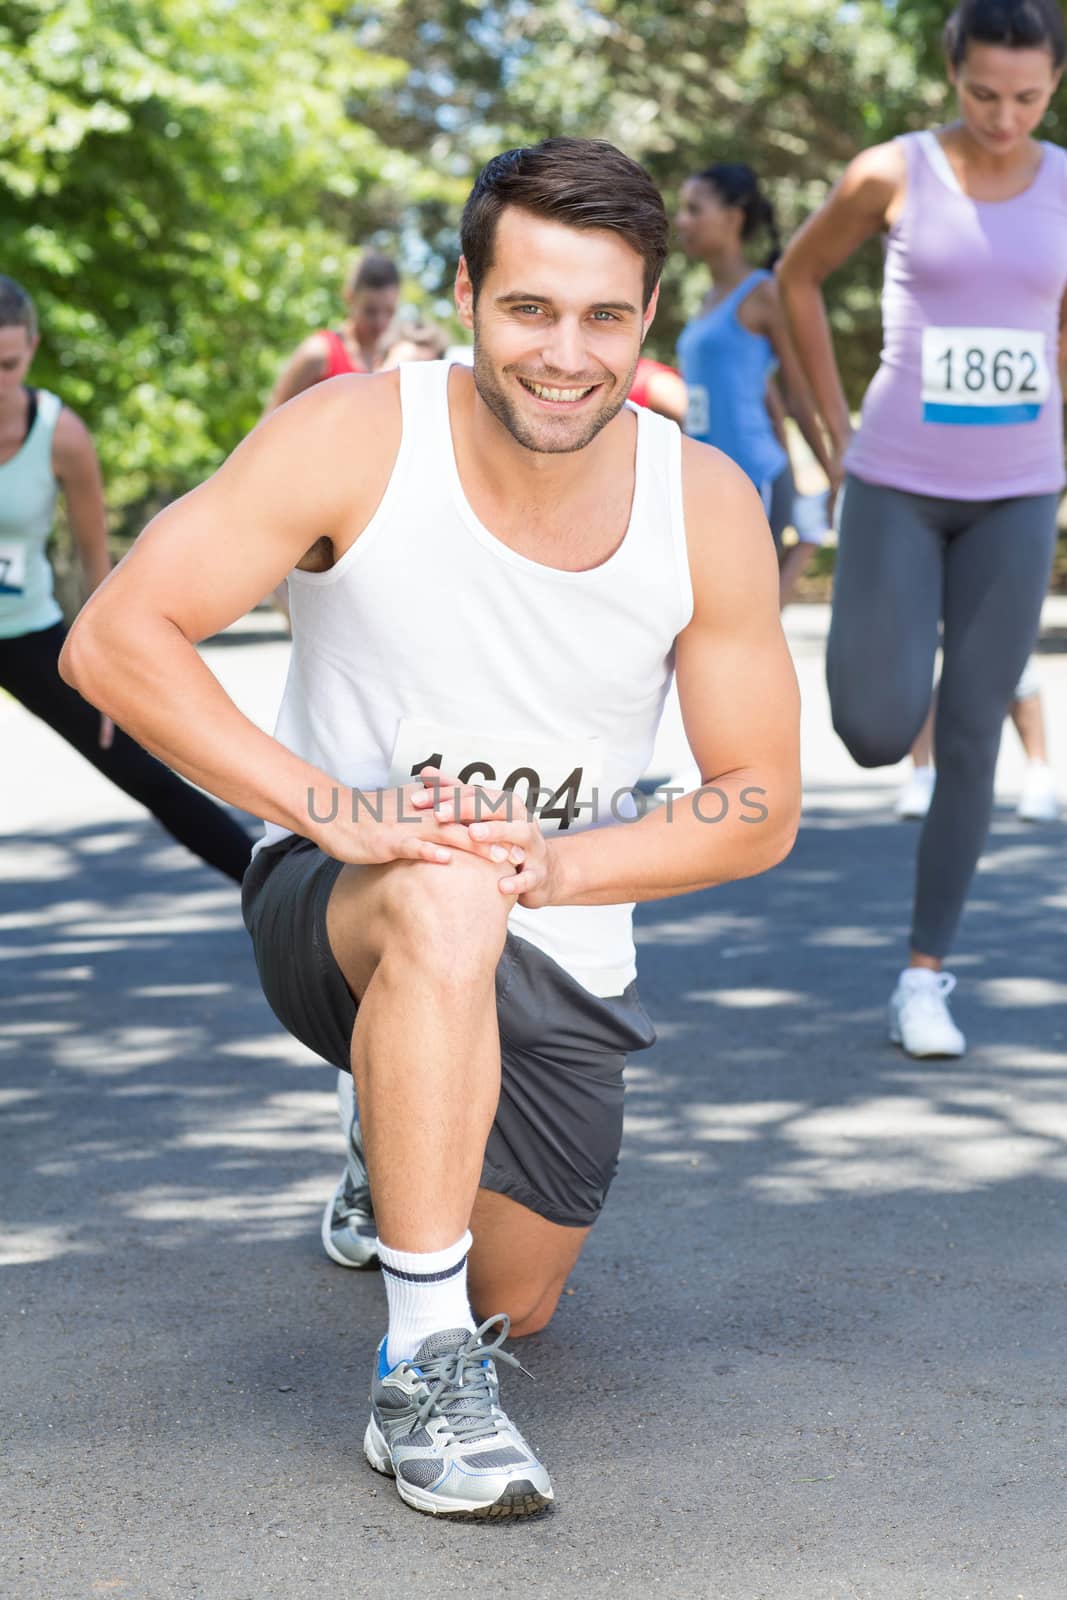 Smiling man warming up before race on a sunny day